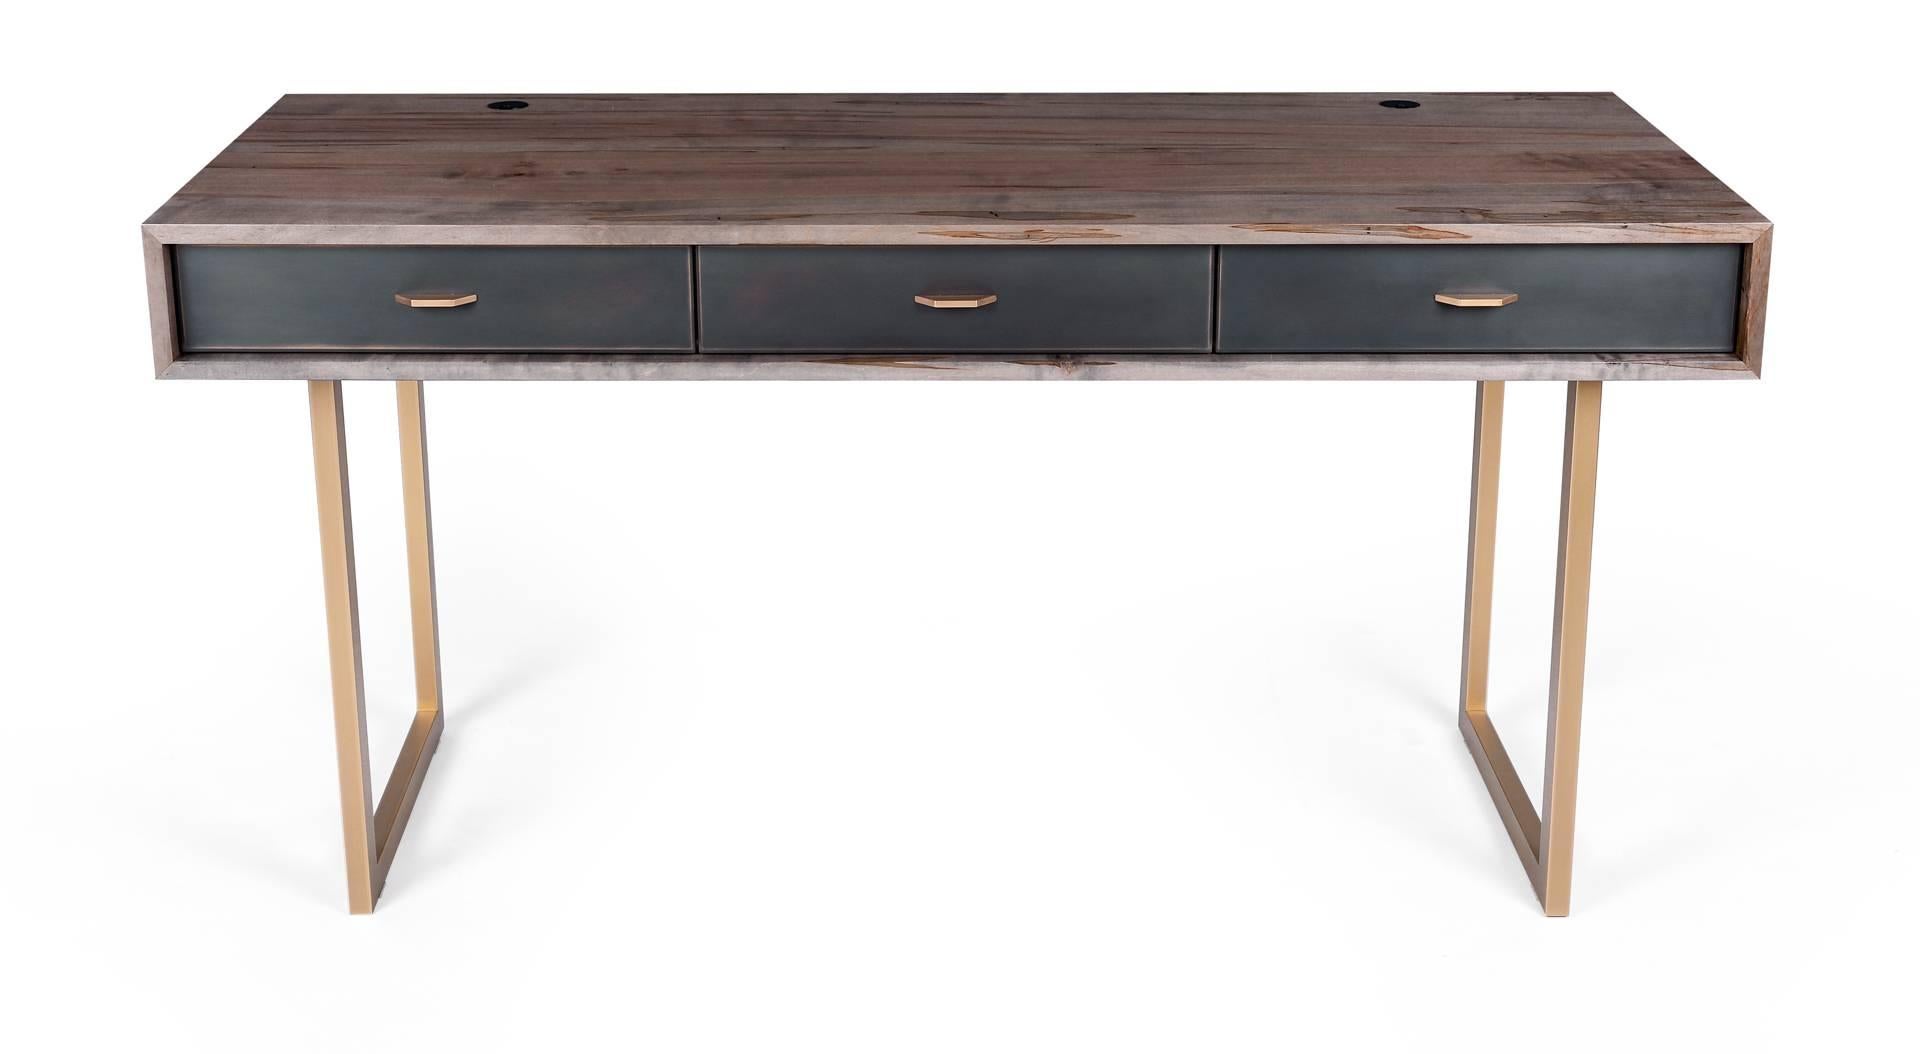 The harmonious mix of materials enhances the beauty of this Gotham desk. The desk features rich oxidized Ambrosia maple wood, a bronze frame, three blackened bronze encased in epoxy resin drawers with black leather lining and hand-sculpted bronze